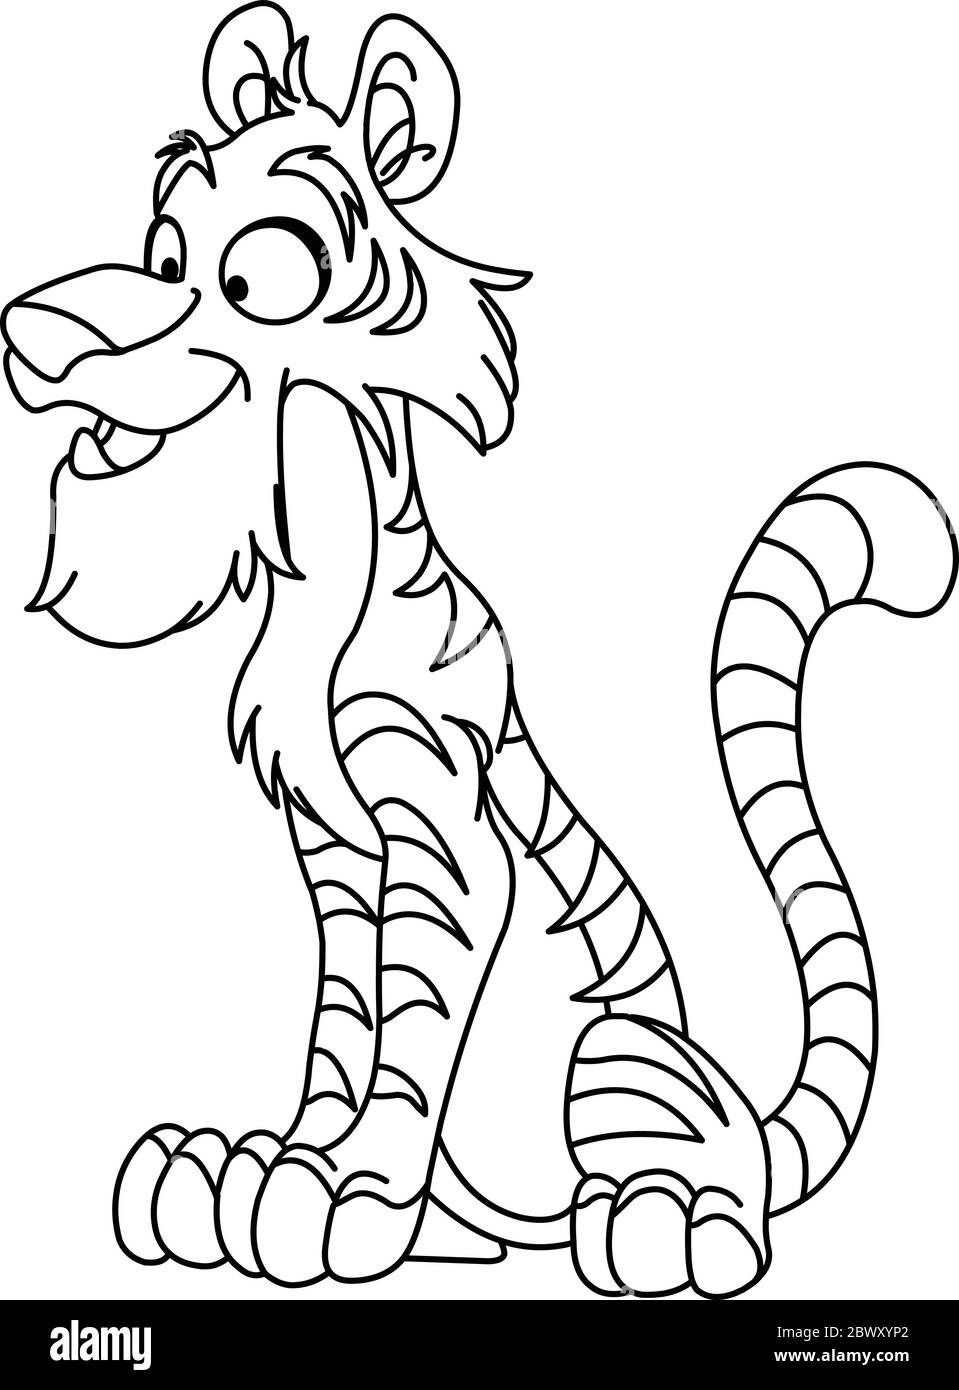 Outlined young tiger. Vector line art illustration coloring page. Stock Vector